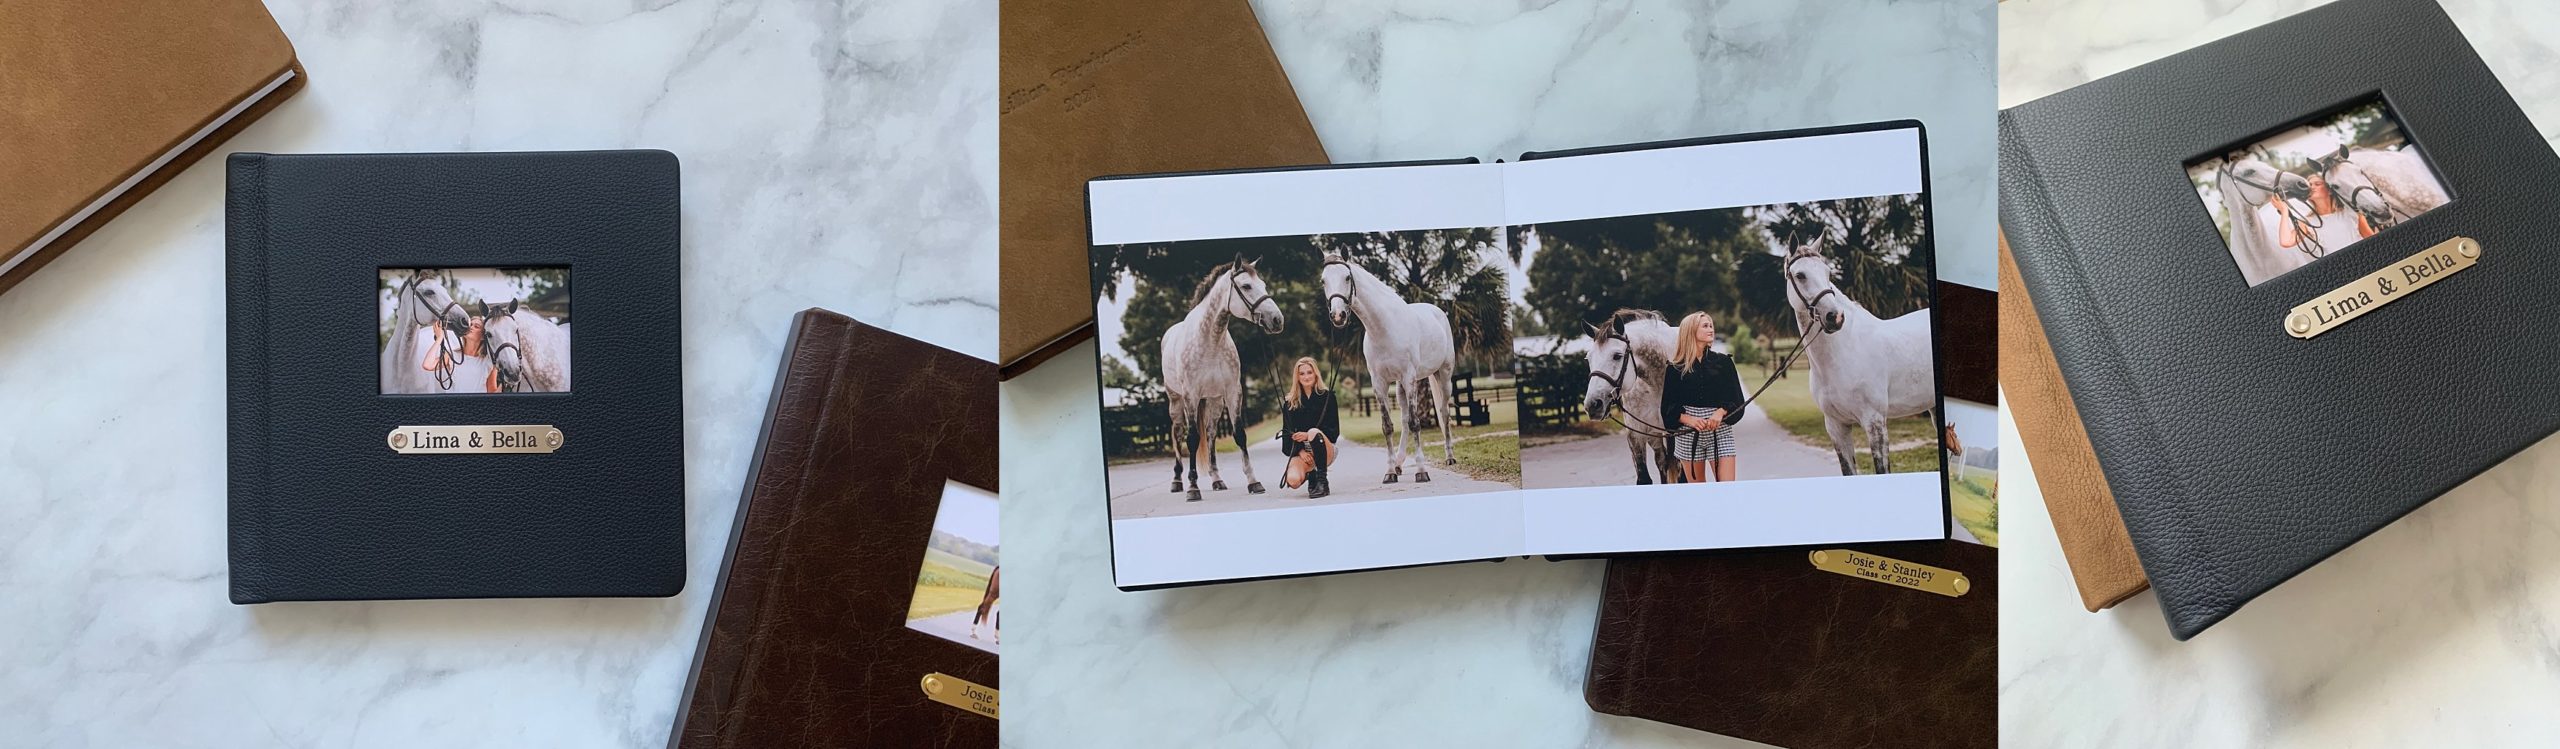 Artistic photo album of equestrian and her horses with silver stable plate.